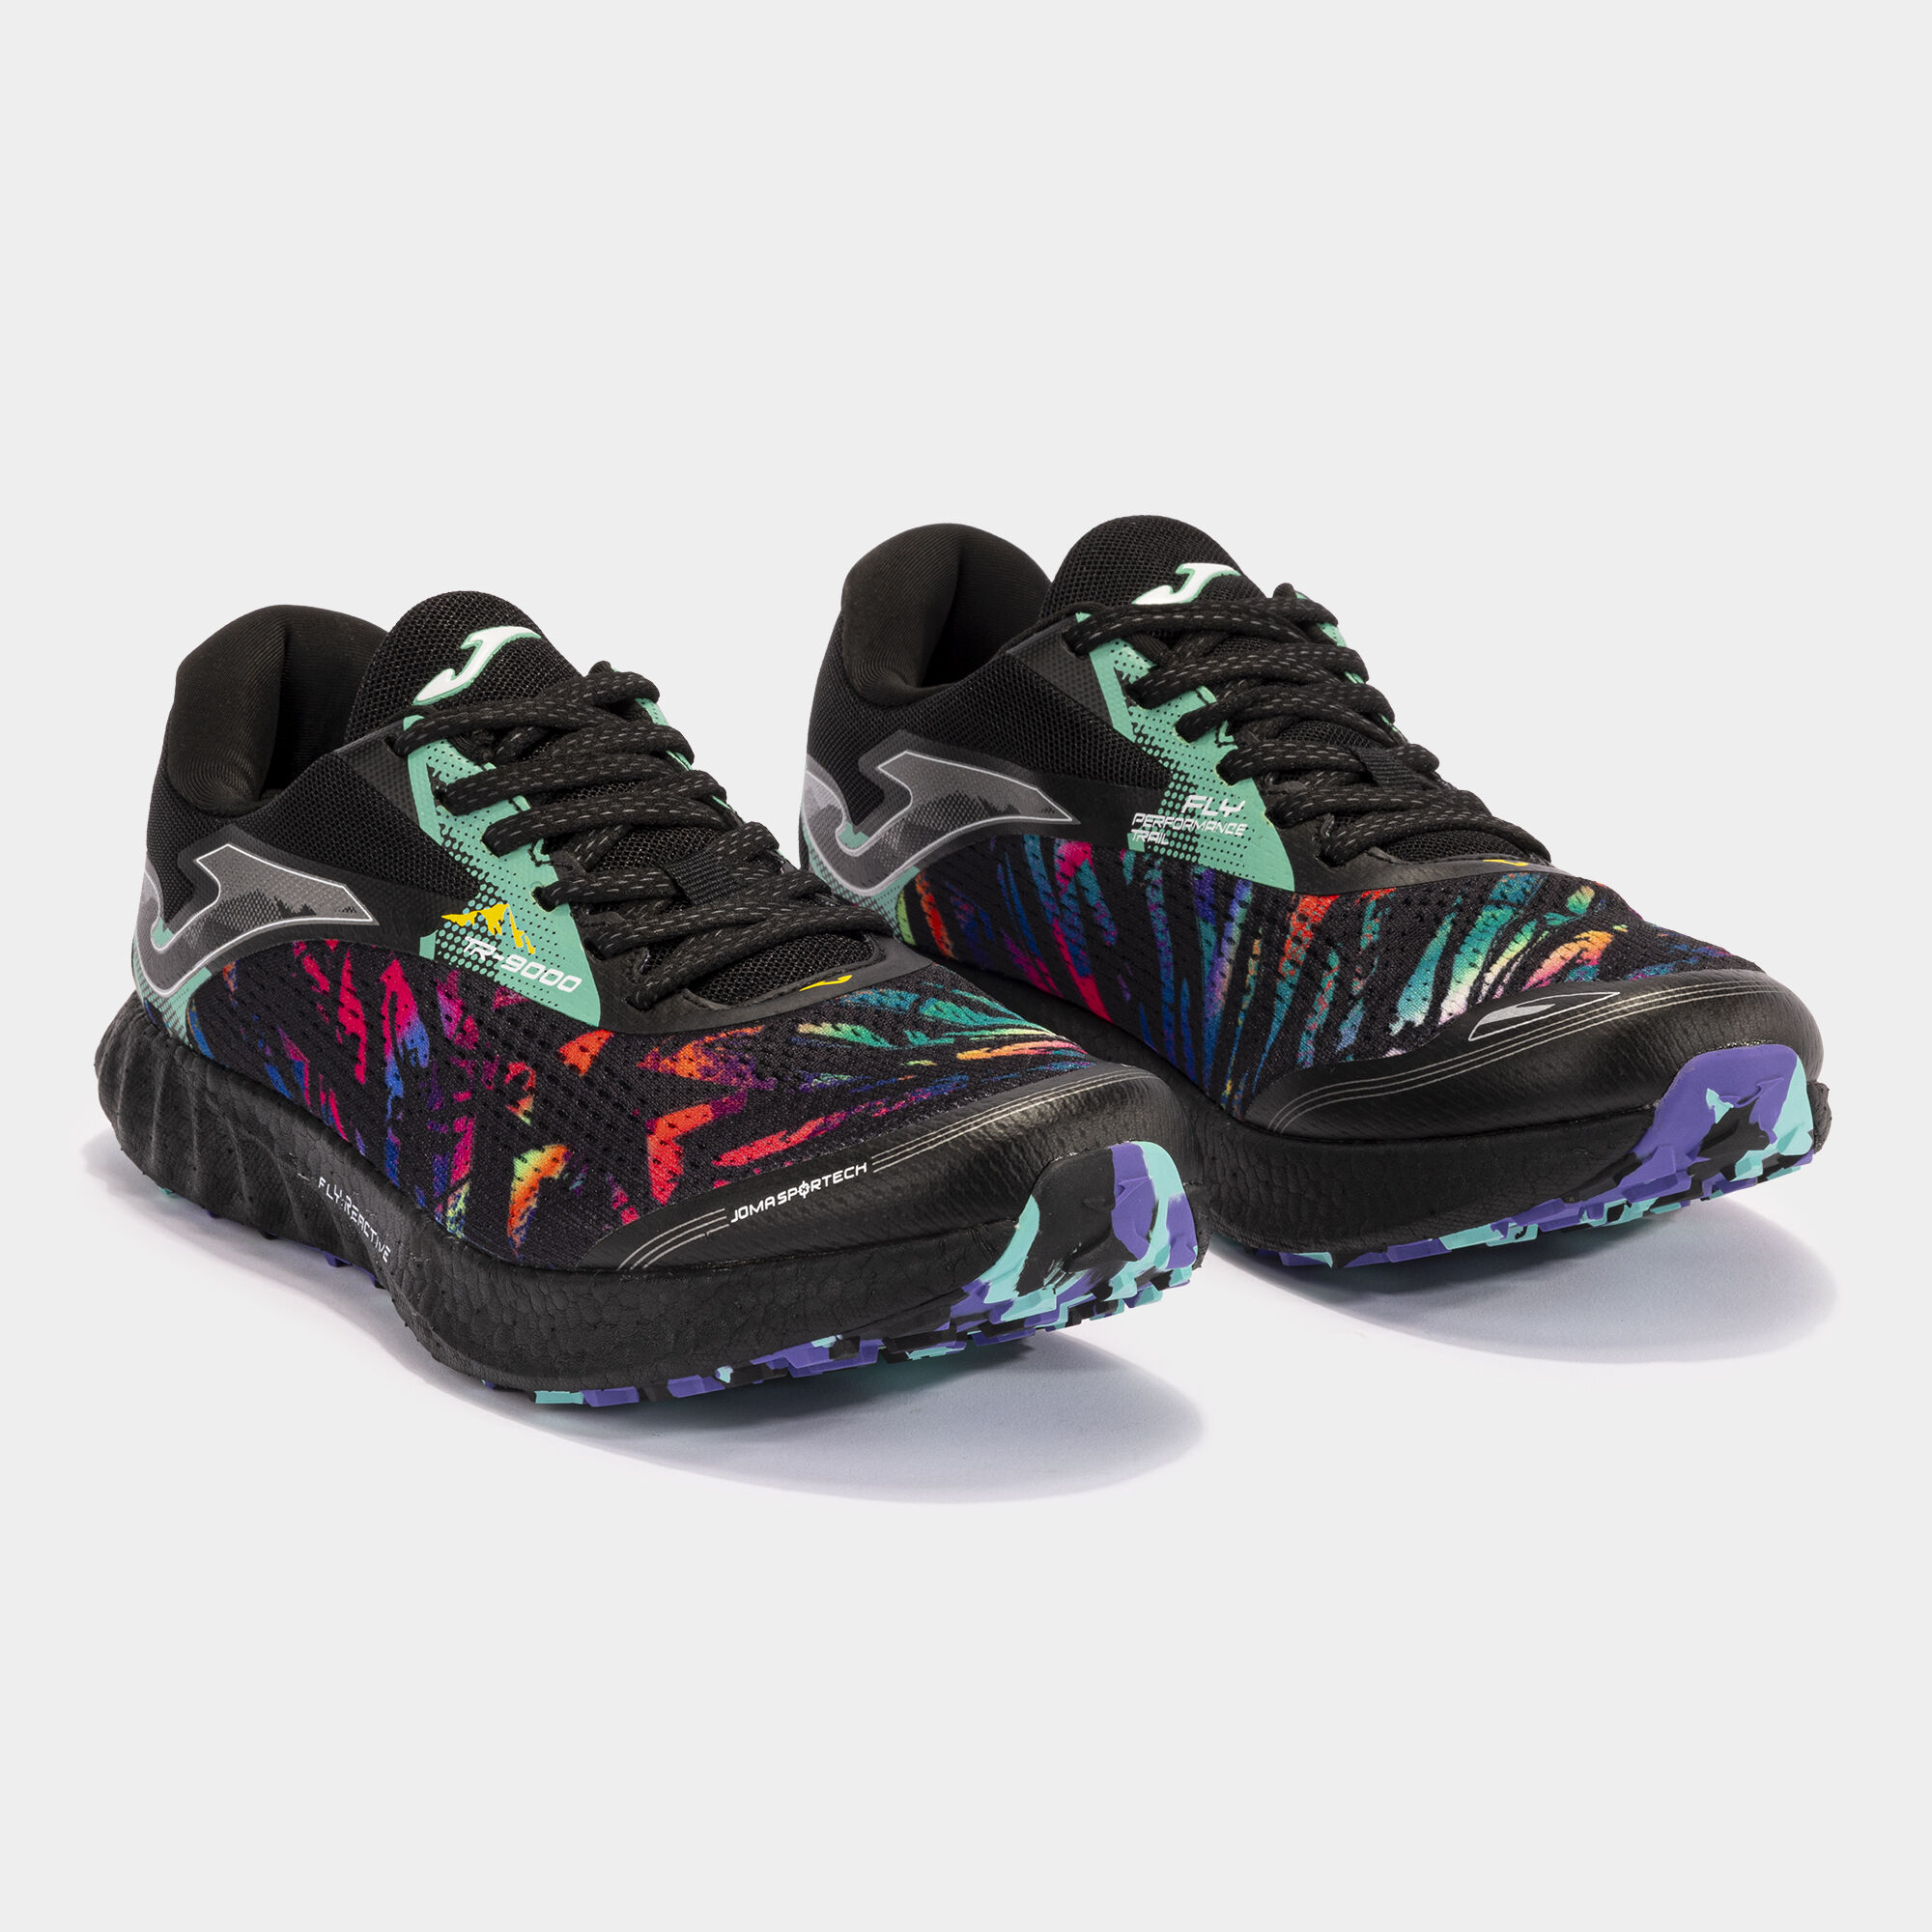 Chaussures trail running Tr-9000 24 unisexe noir multicolore